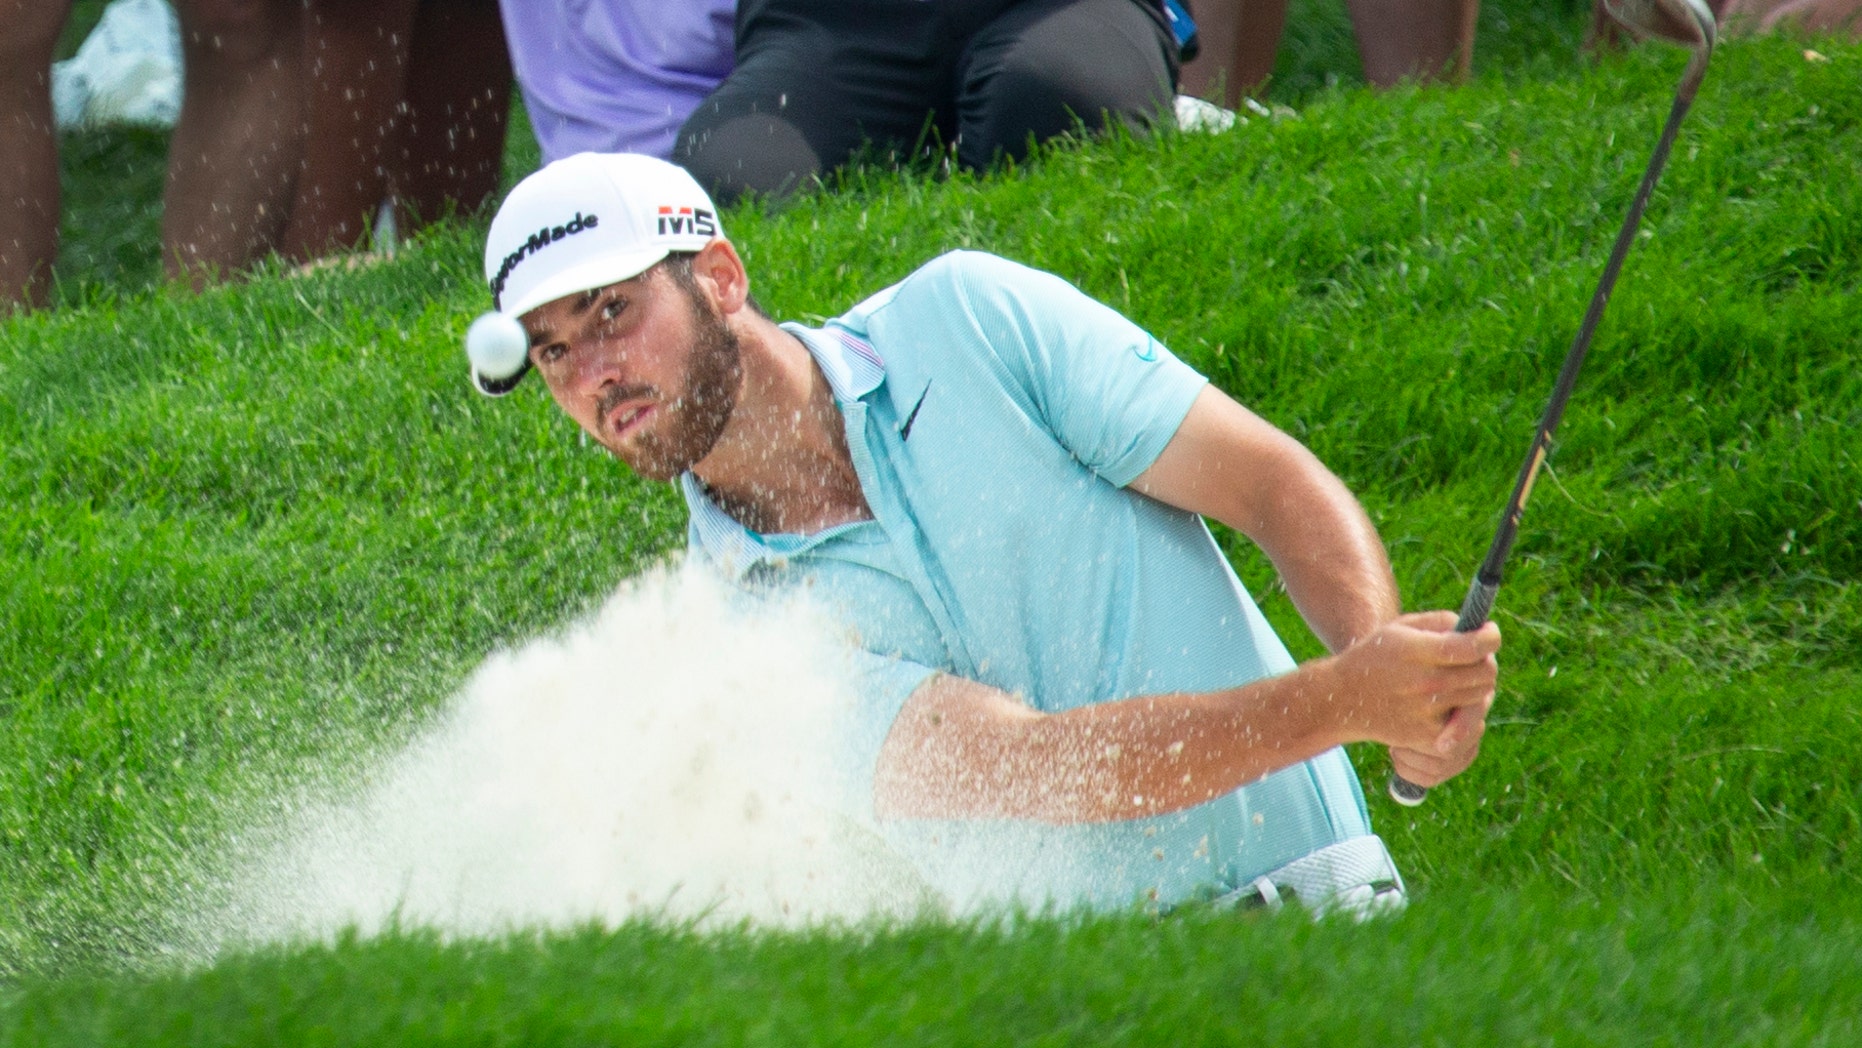 Matthew Wolff hit a bunker on the 12th hole in the last round of the 3M Open Golf Tournament on Sunday, July 7, 2019 in Blaine, Minnesota. (AP Photo / Andy Clayton-King)